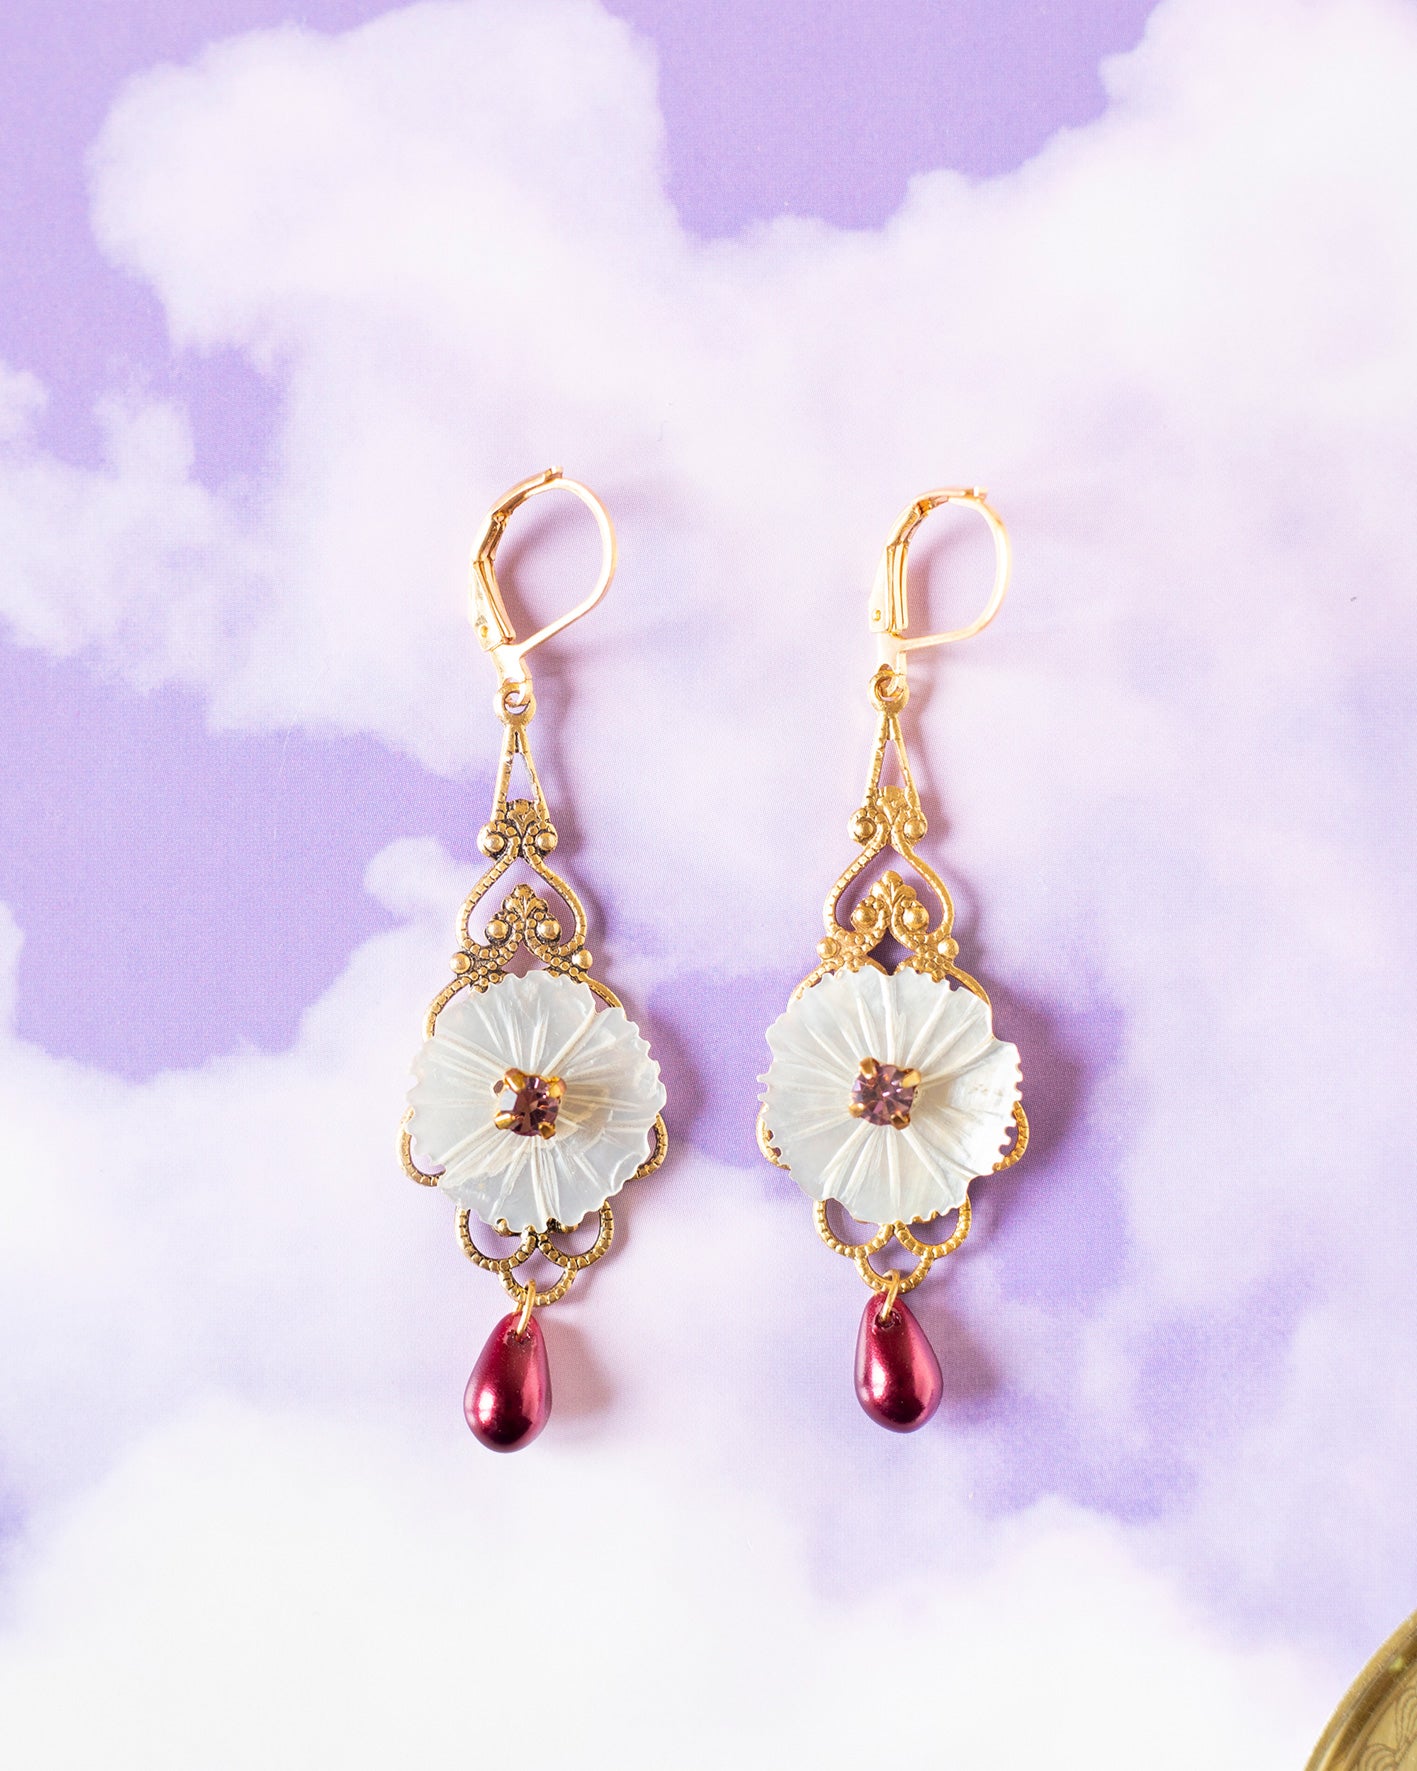 Earrings with vintage baroque prints and white mother-of-pearl buttons